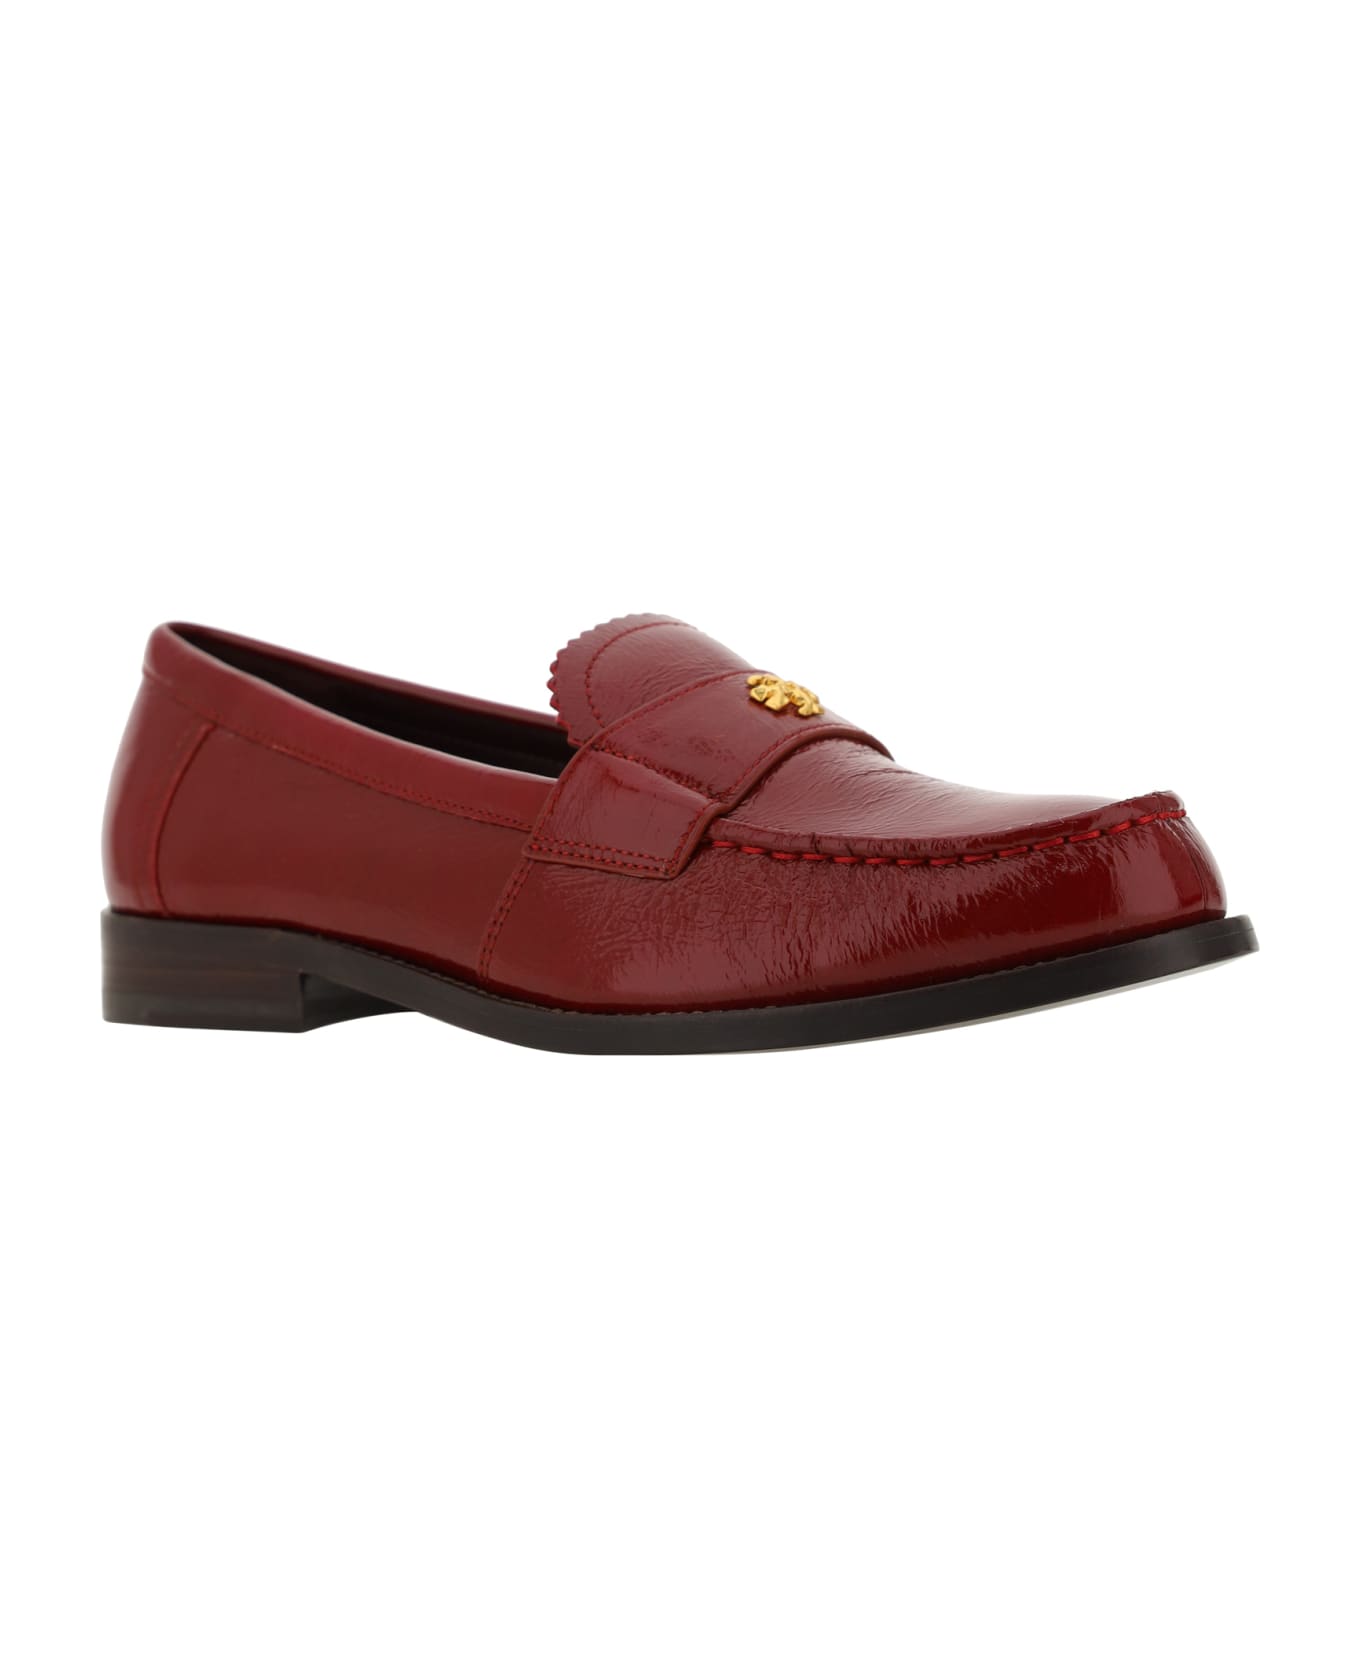 Tory Burch Classic Loafers - Crimson Red フラットシューズ